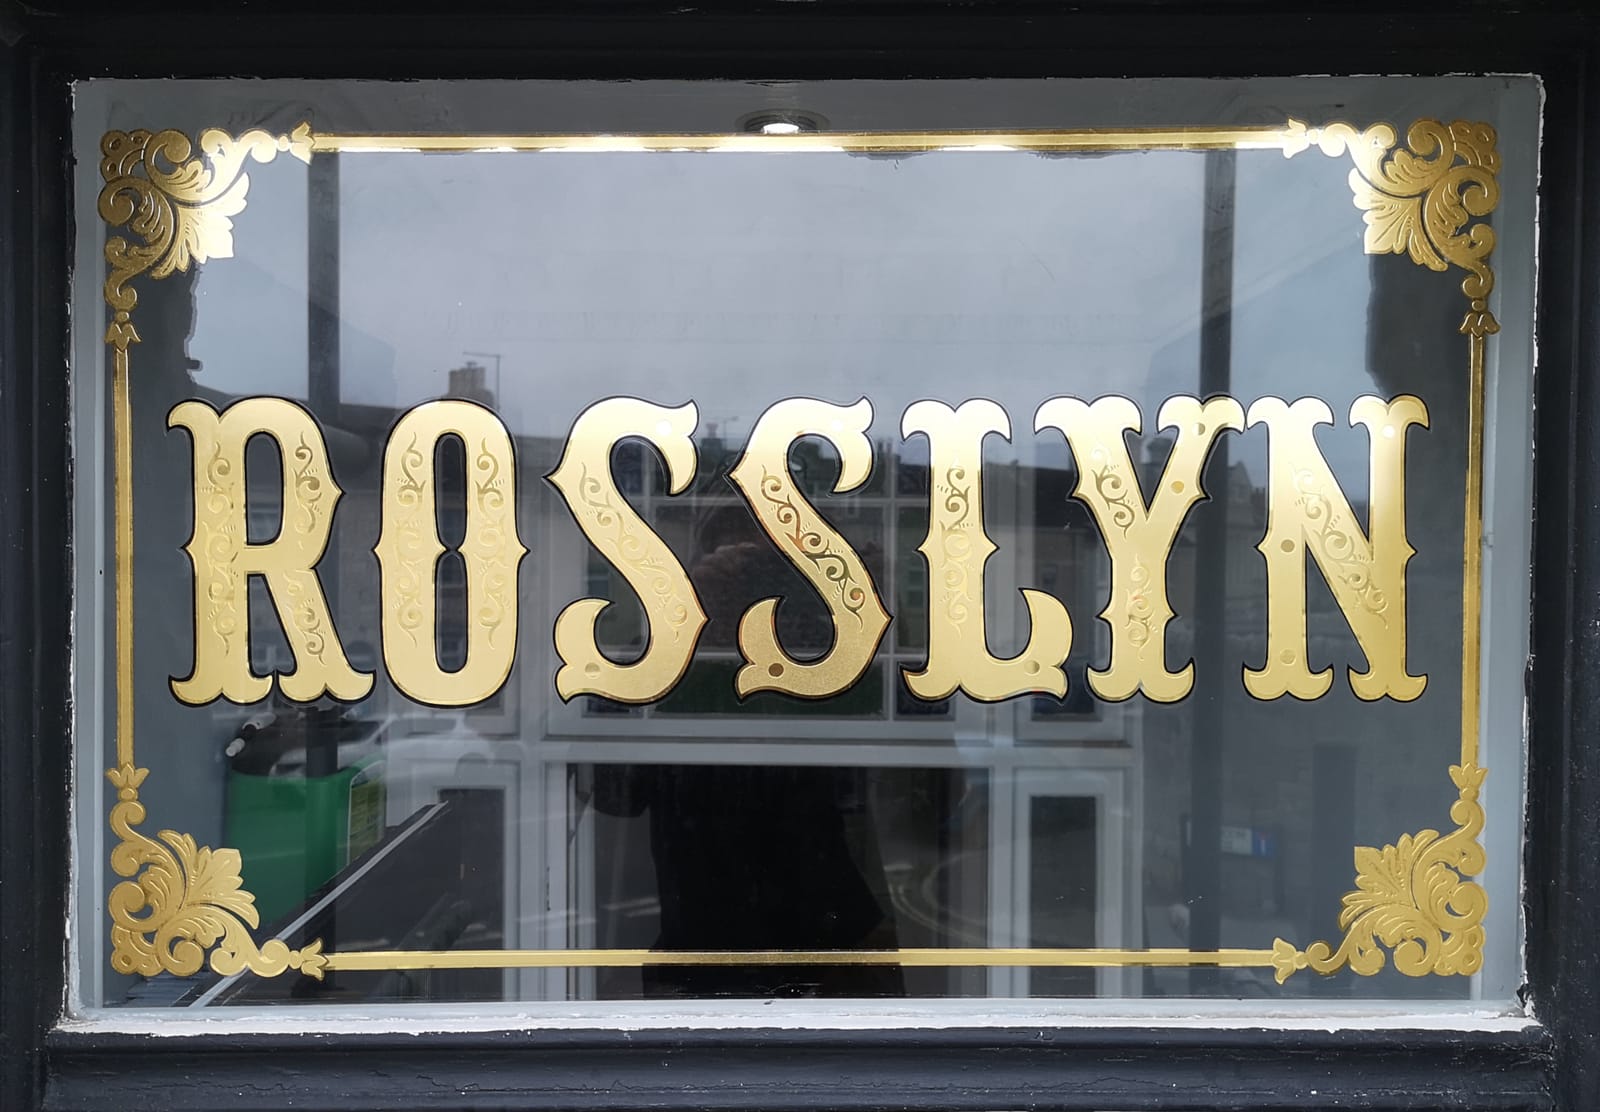 A glass window with gold leaf applied to form an decorative border with corner ornaments and bifurcated lettering in the middle that reads "Rosslyn".